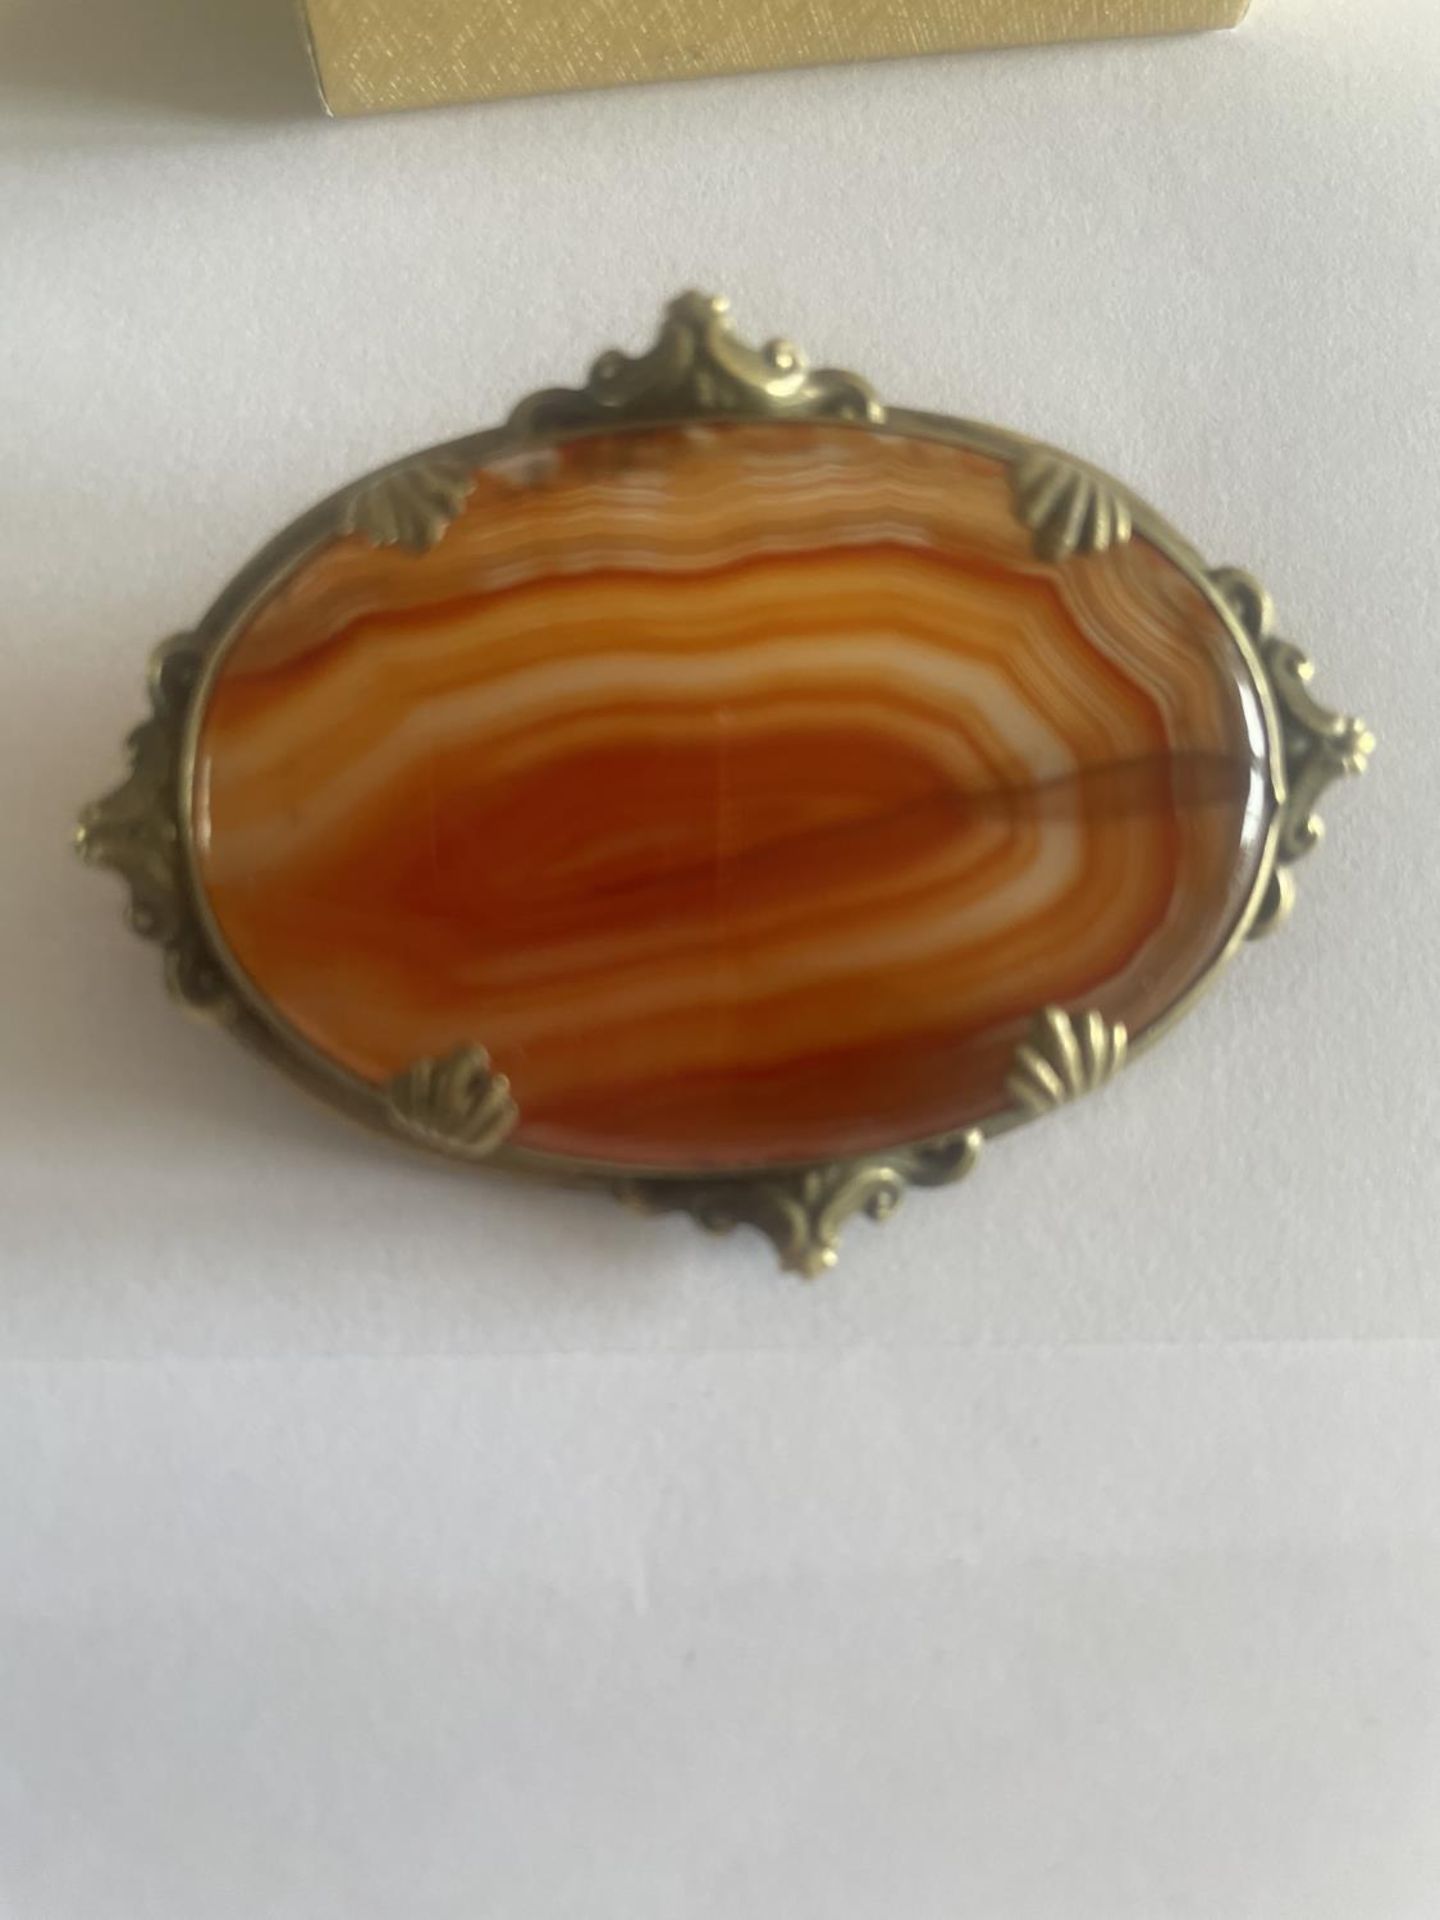 A PINCH BECK BROOCH WITH A LARGE AGATE STONE IN A PRESENTATION BOX